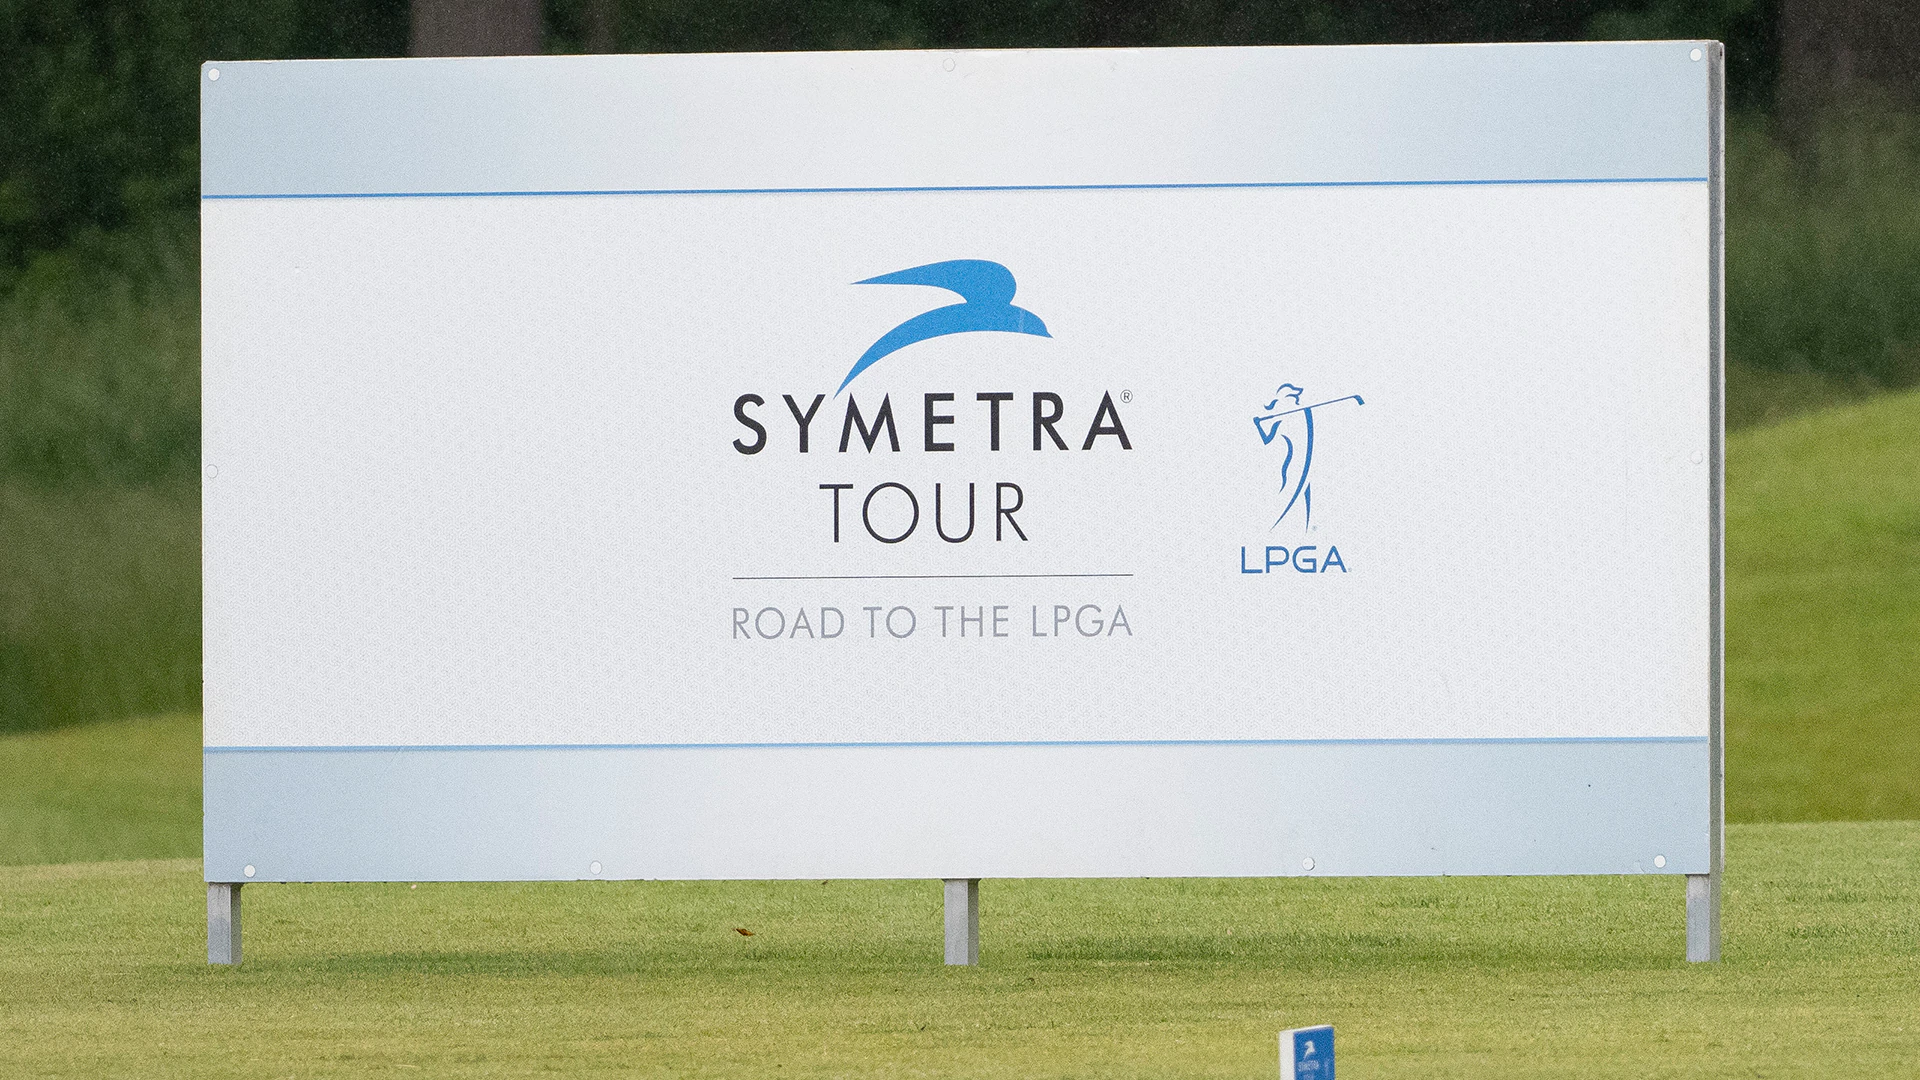 Symetra Tour announces condensed schedule, adds two events